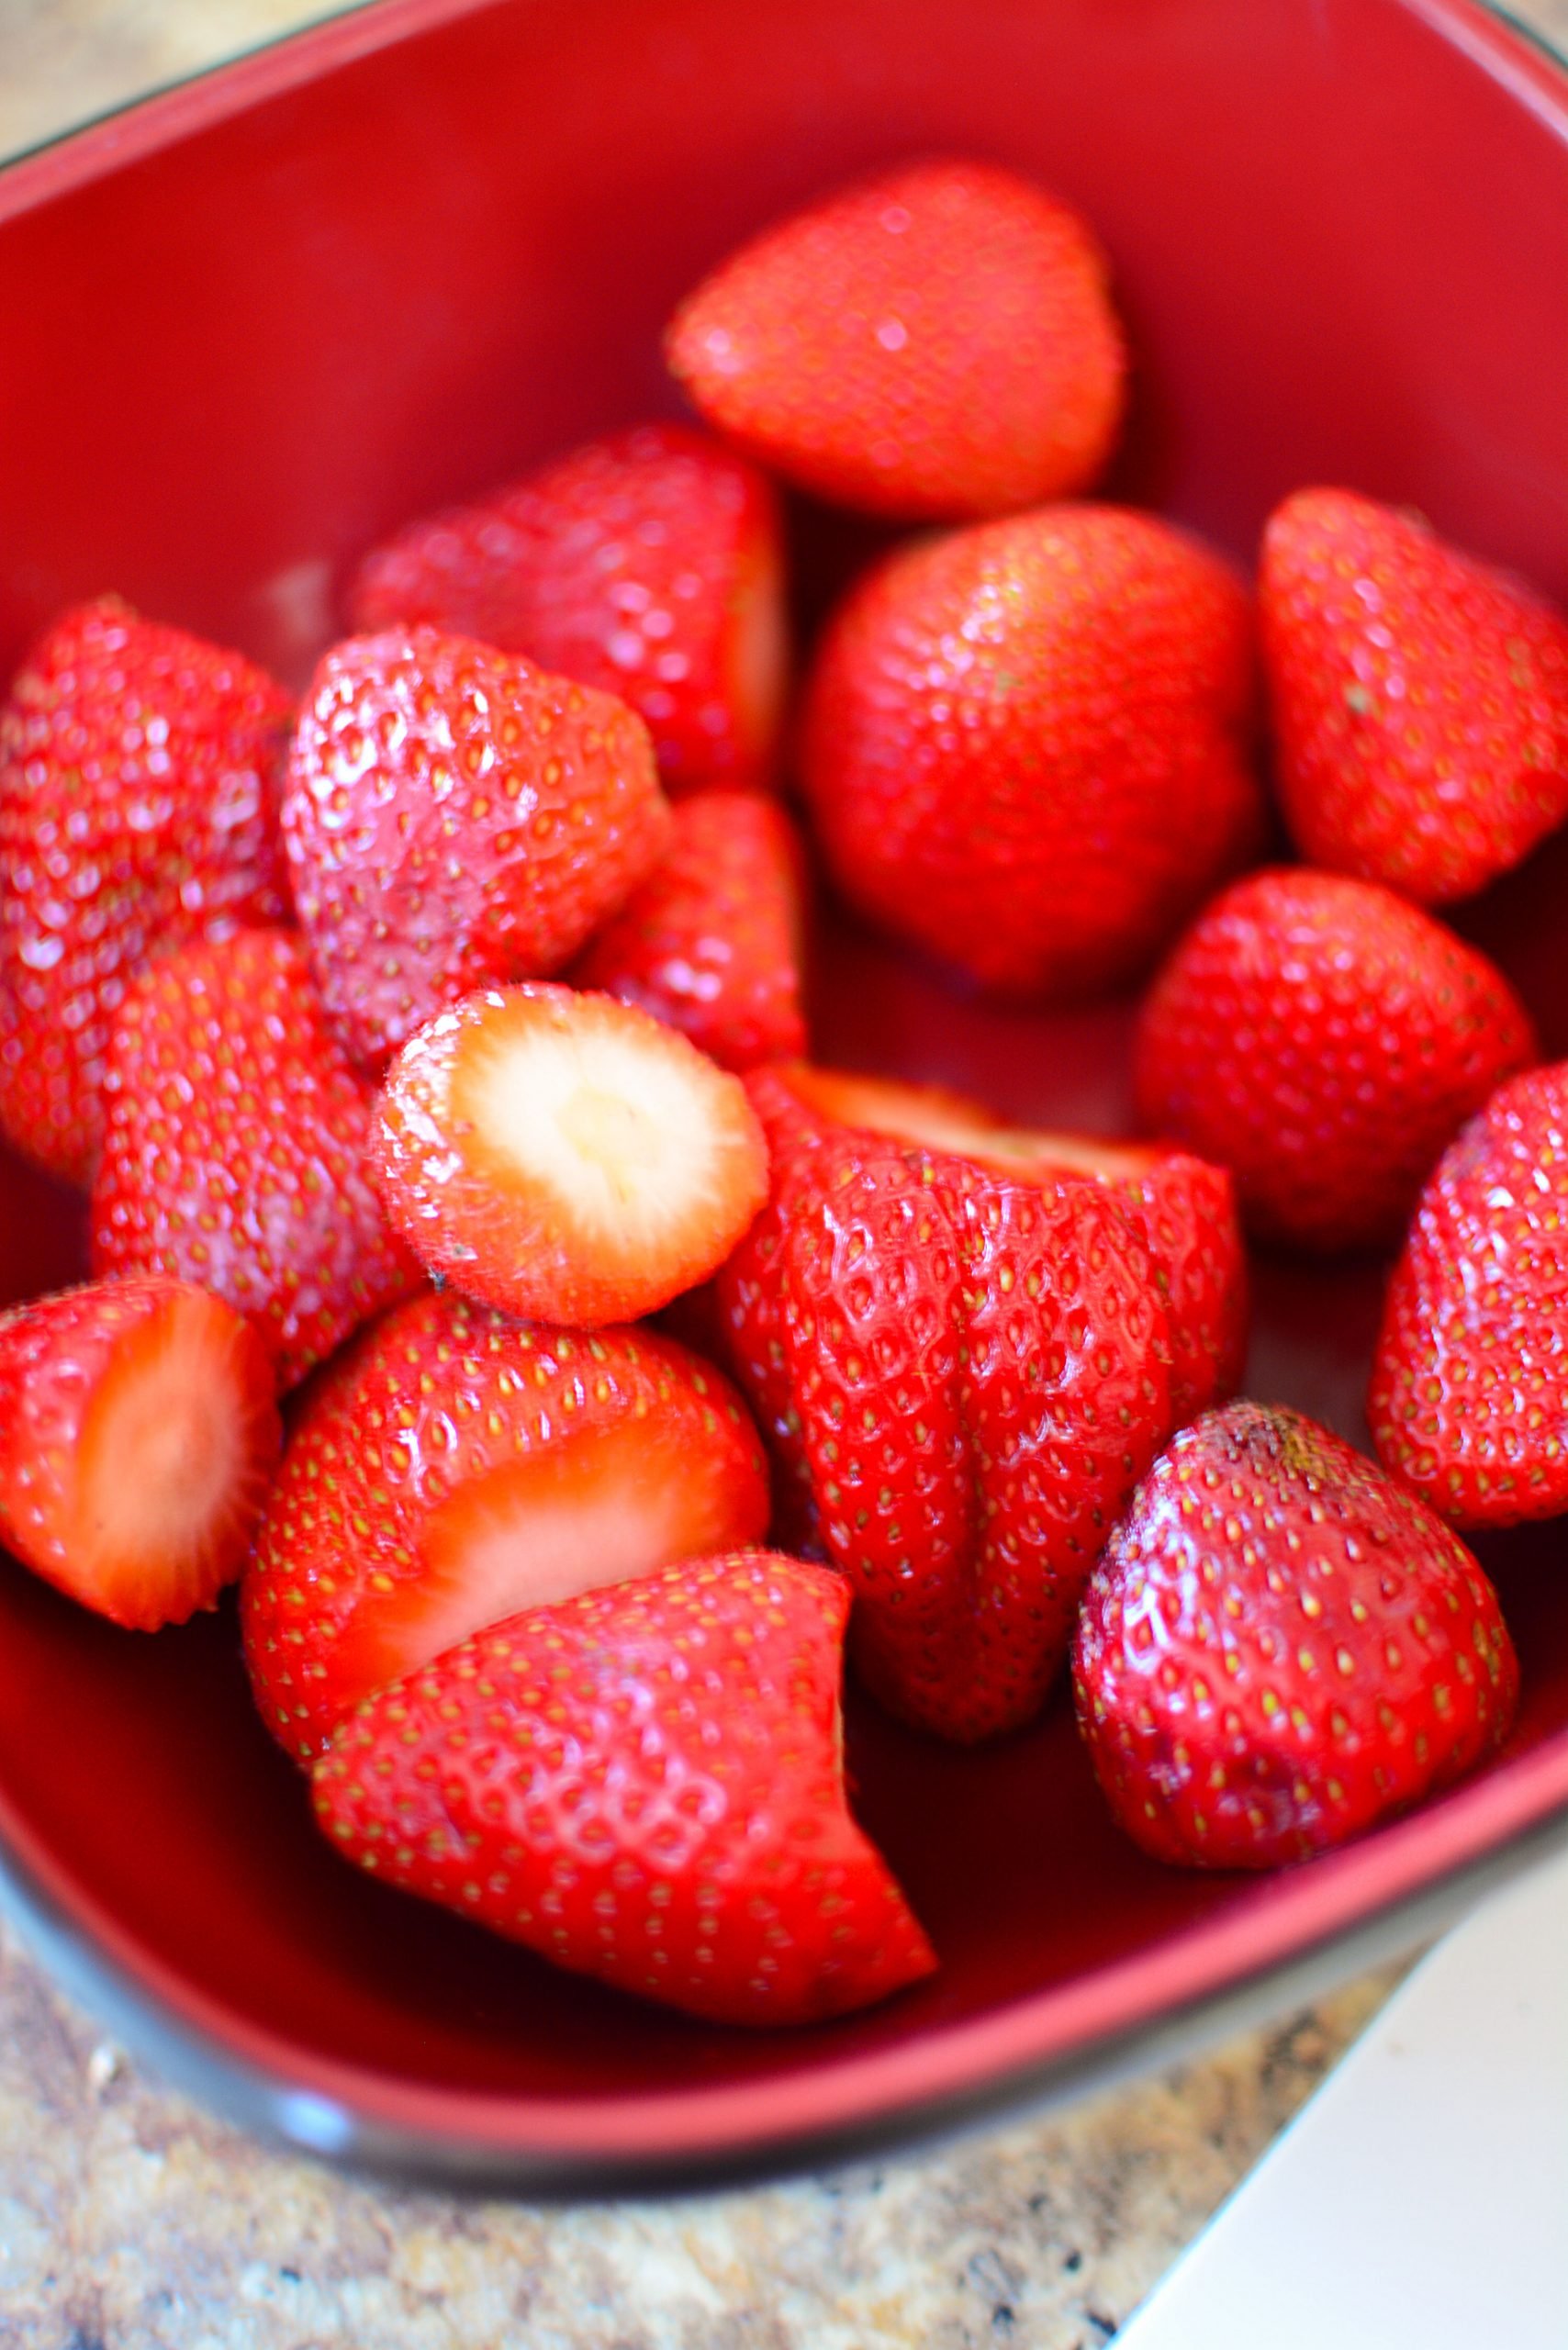 Fresh strawberries in a red bowl.